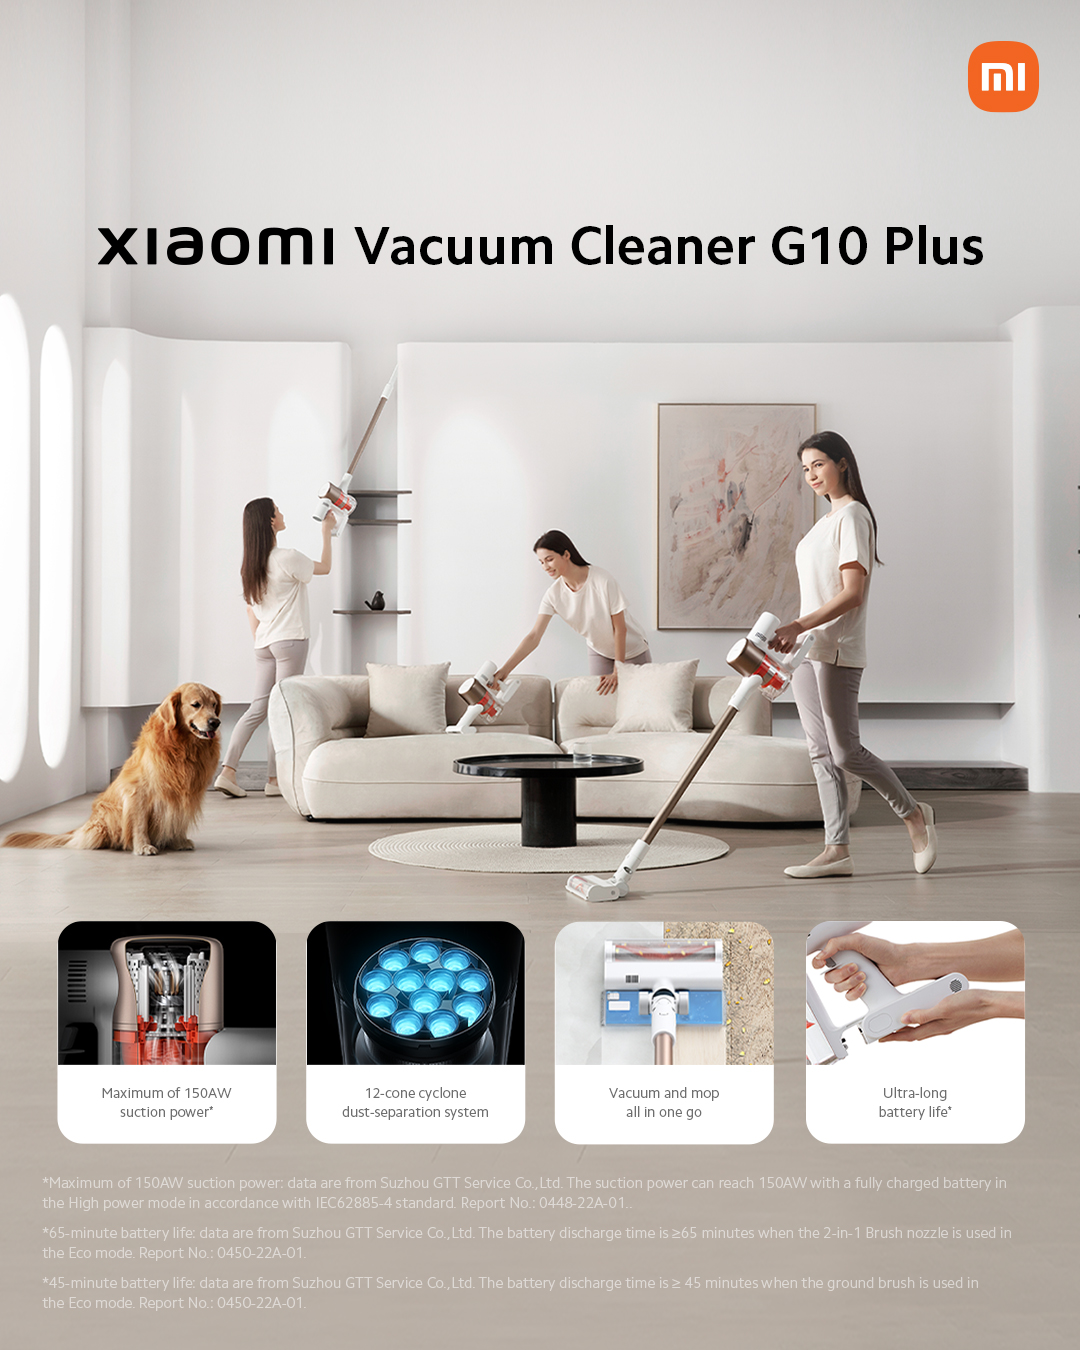 Xiaomi Malaysia on X: The Xiaomi Vacuum Cleaner G10 Plus offers a